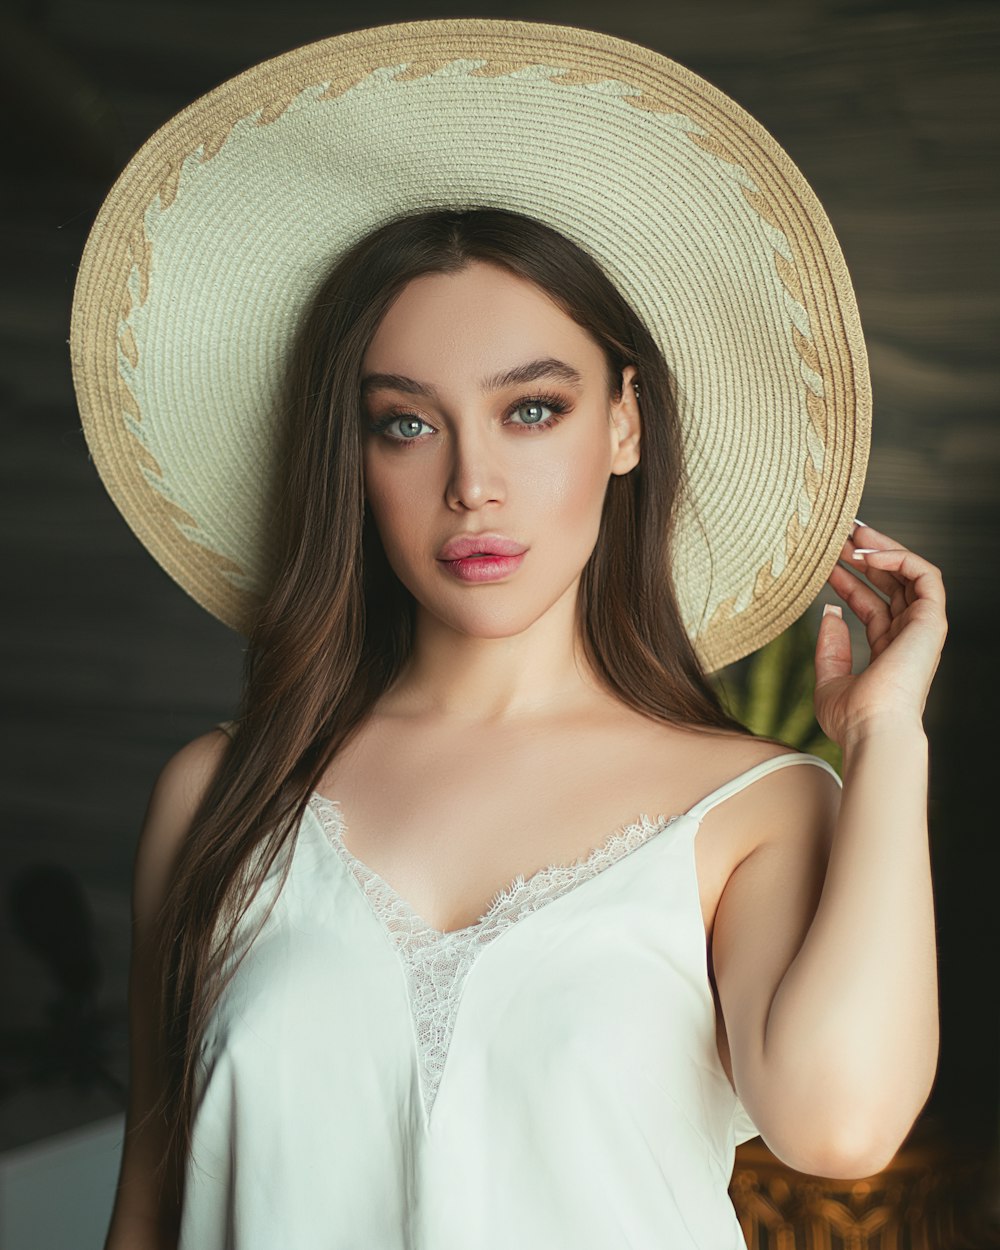 woman in white halter top wearing brown straw hat